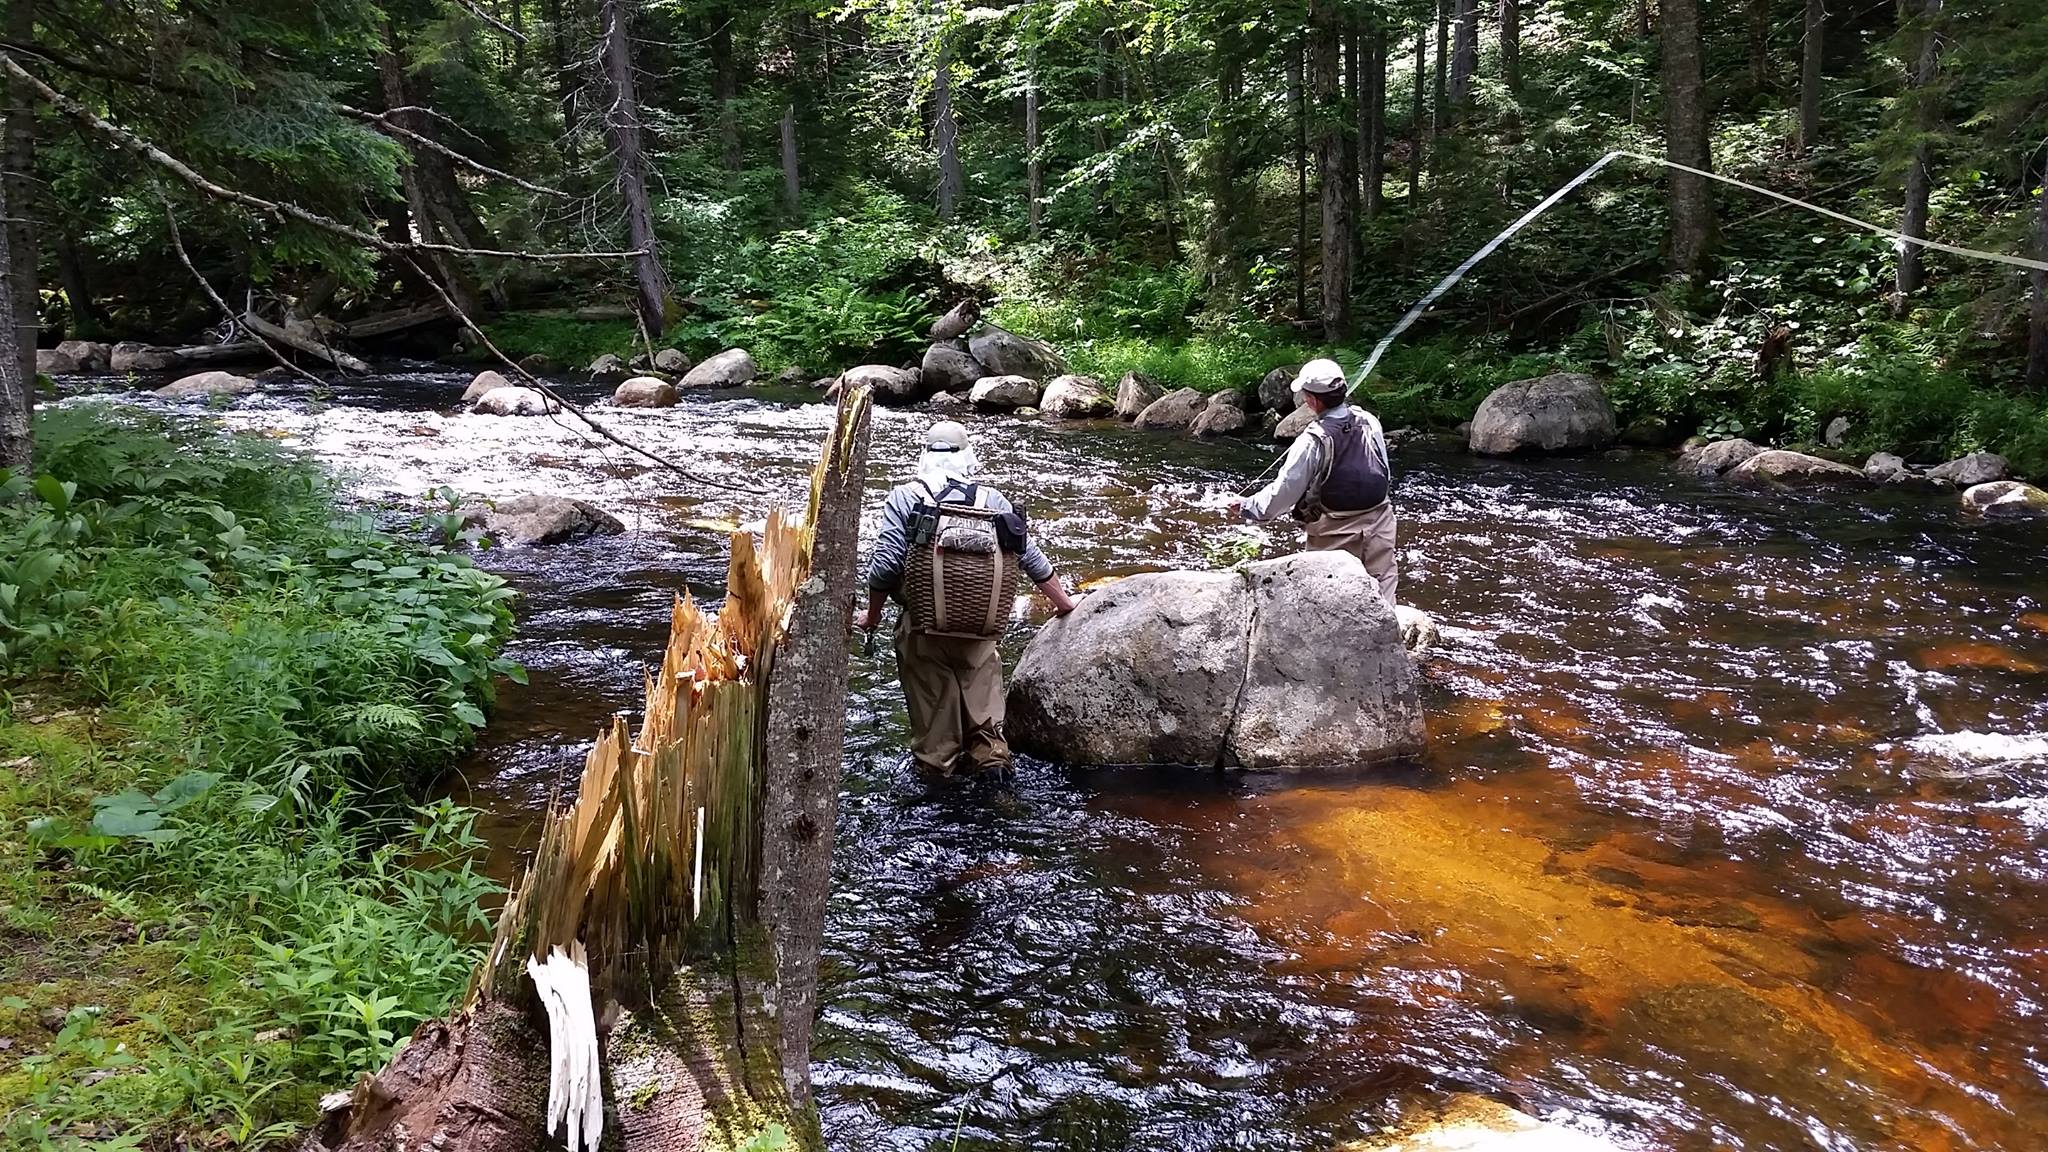 Professional Fly Fishing Guide Service In Upstate New York